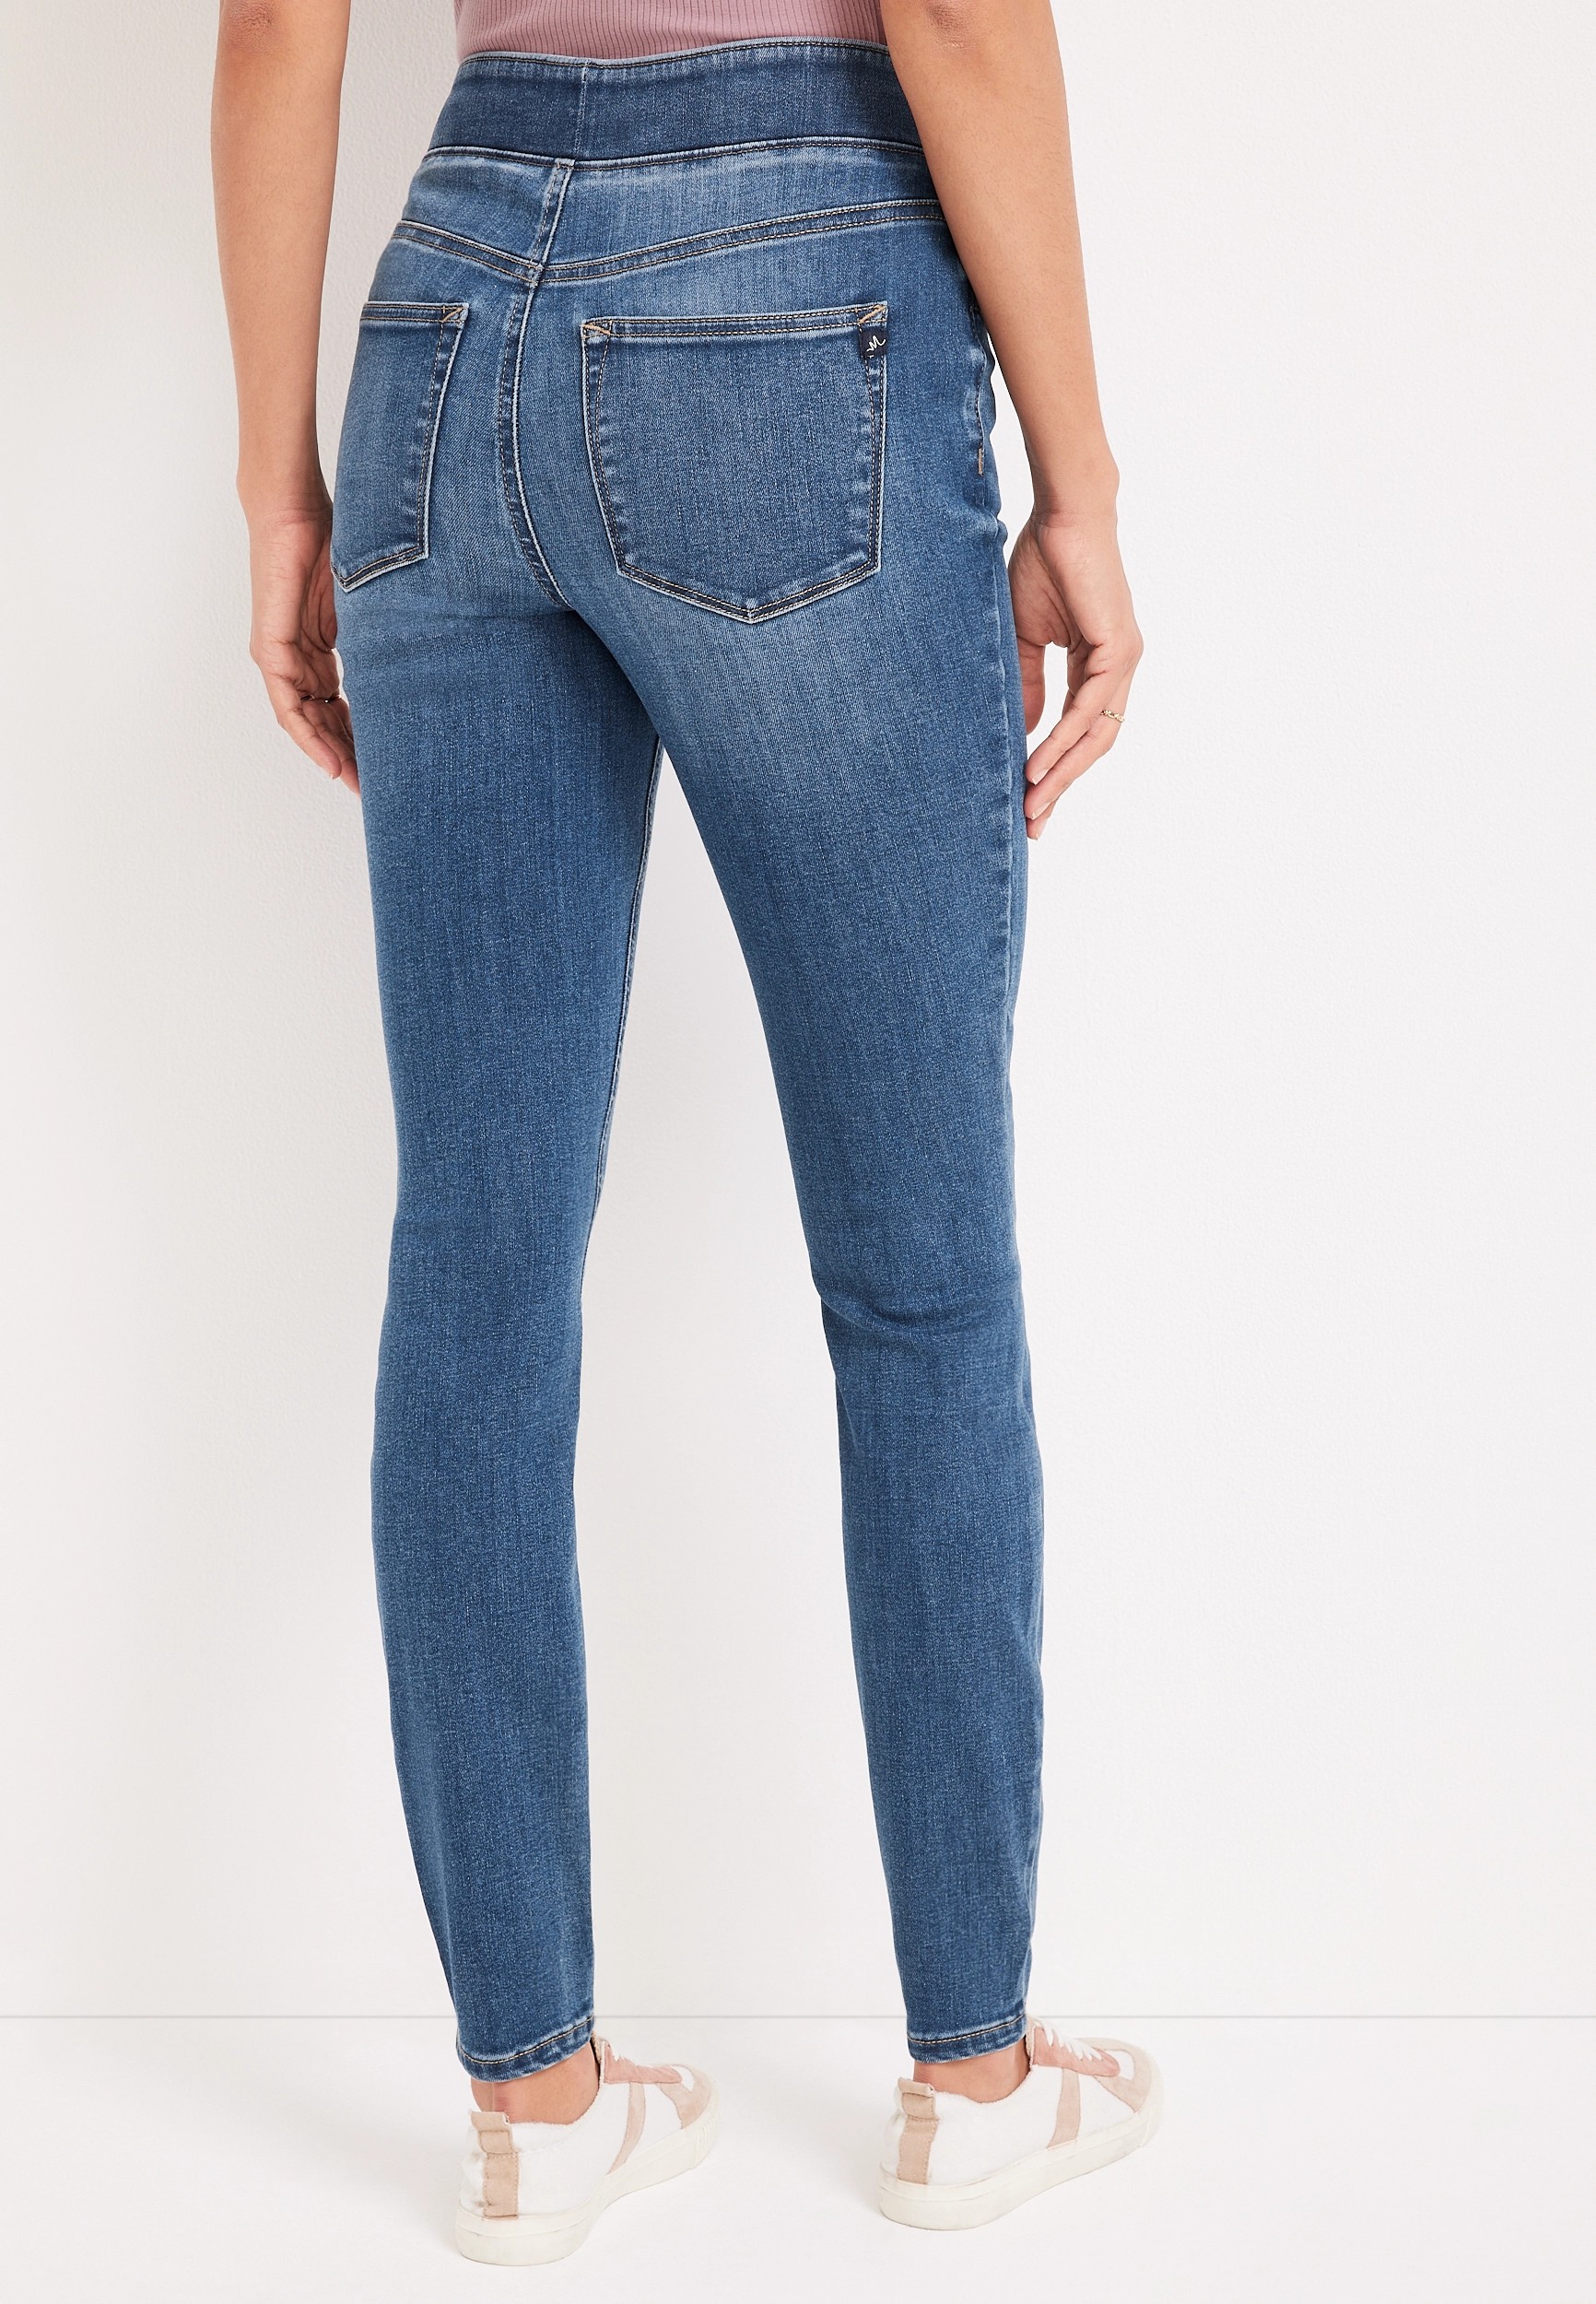 m jeans by maurices™ Cool Comfort Crossover Pull On High Rise Jegging ...